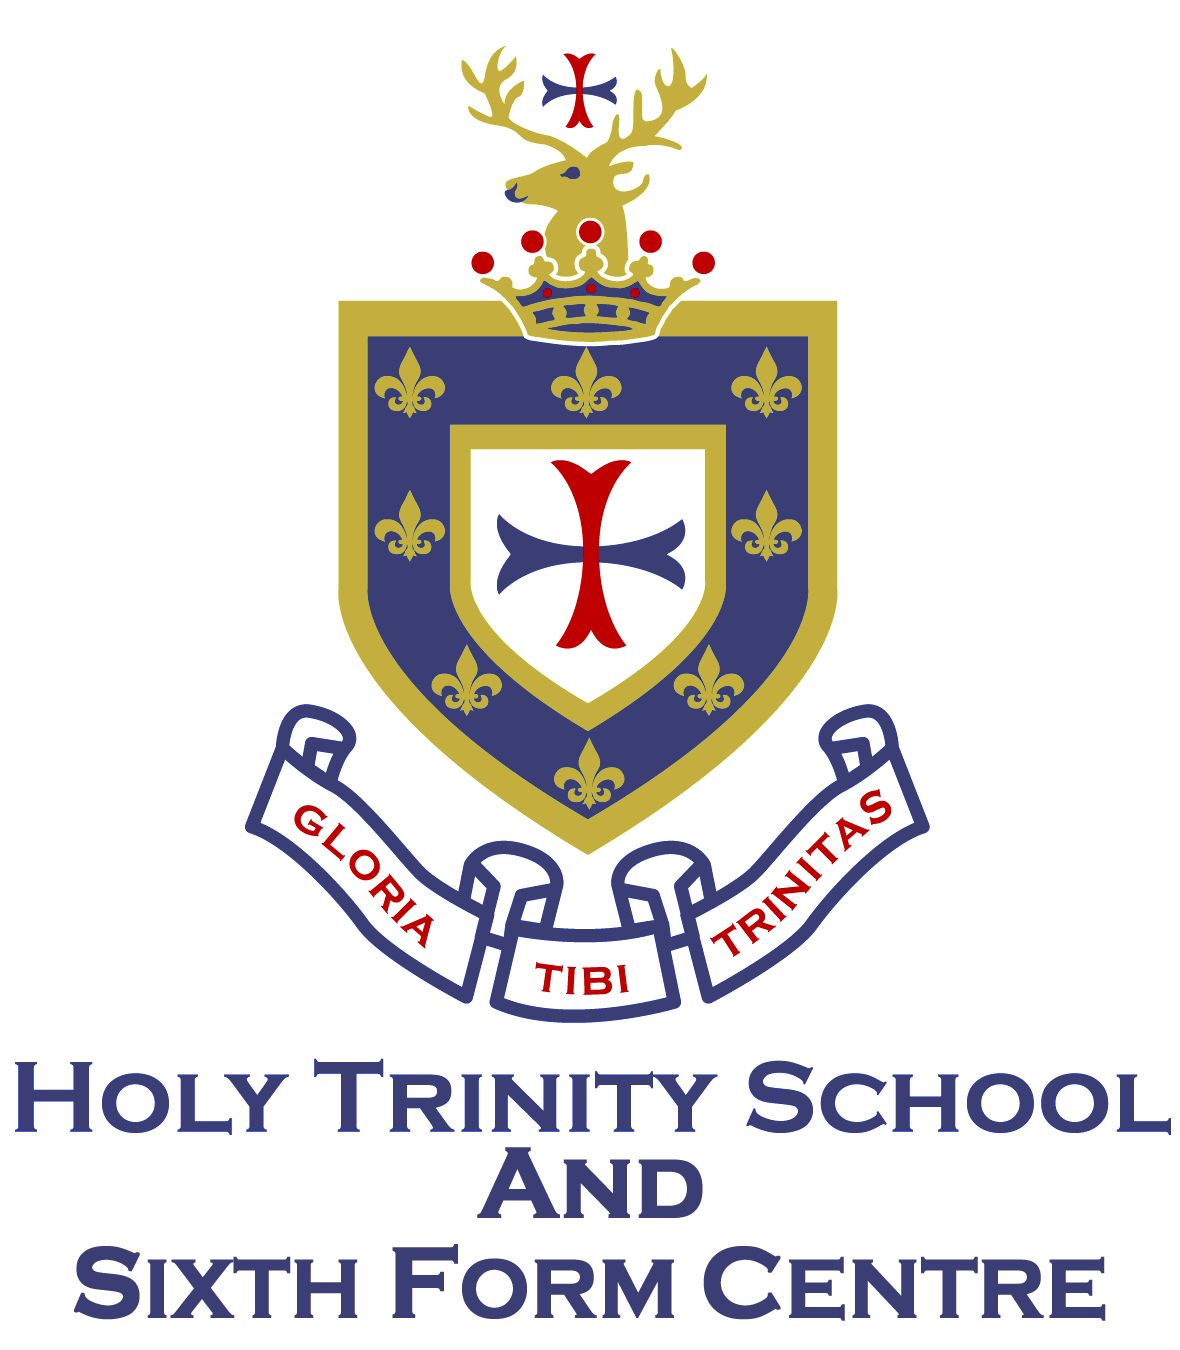 Governors’ Clerk Sought by Kidderminster's Holy Trinity School and Sixth Form Centre